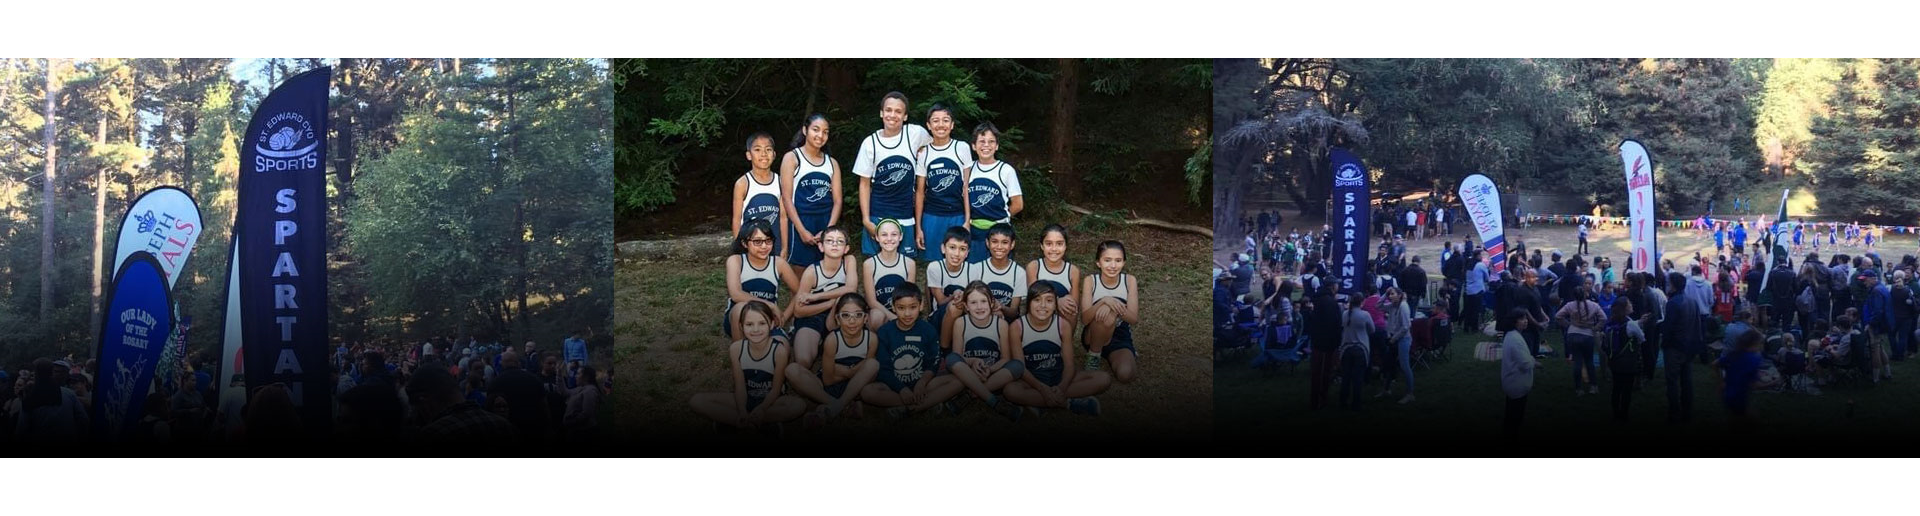 Spartan Cross Country!